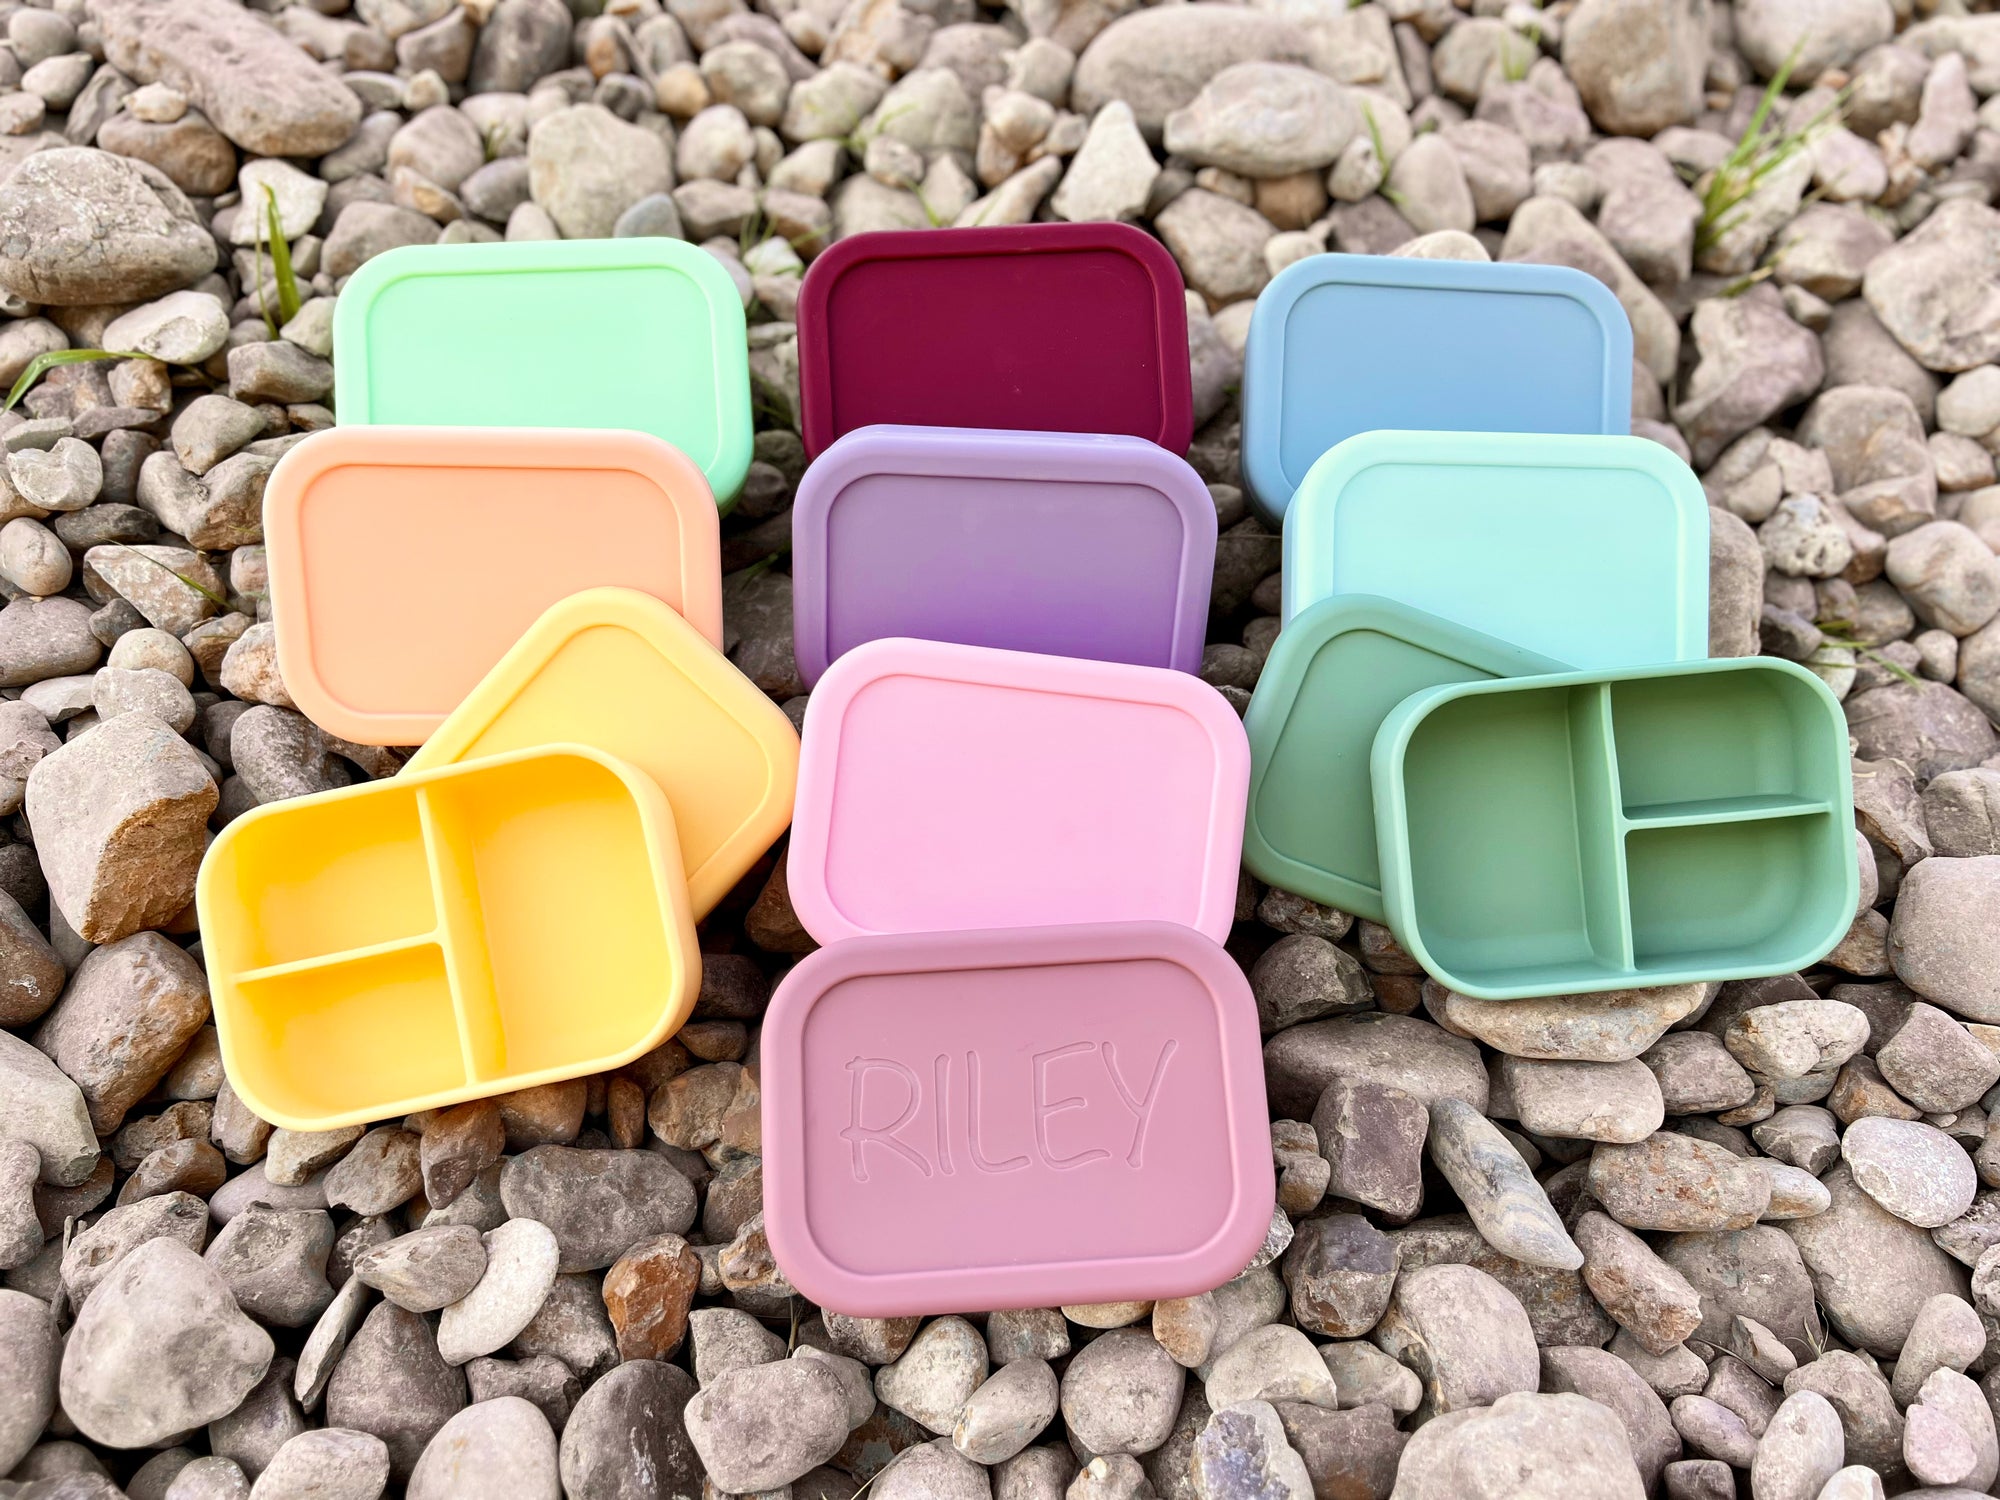 Large Capacity Food-Grade Silicone Bento Box with Leak-Proof Lid